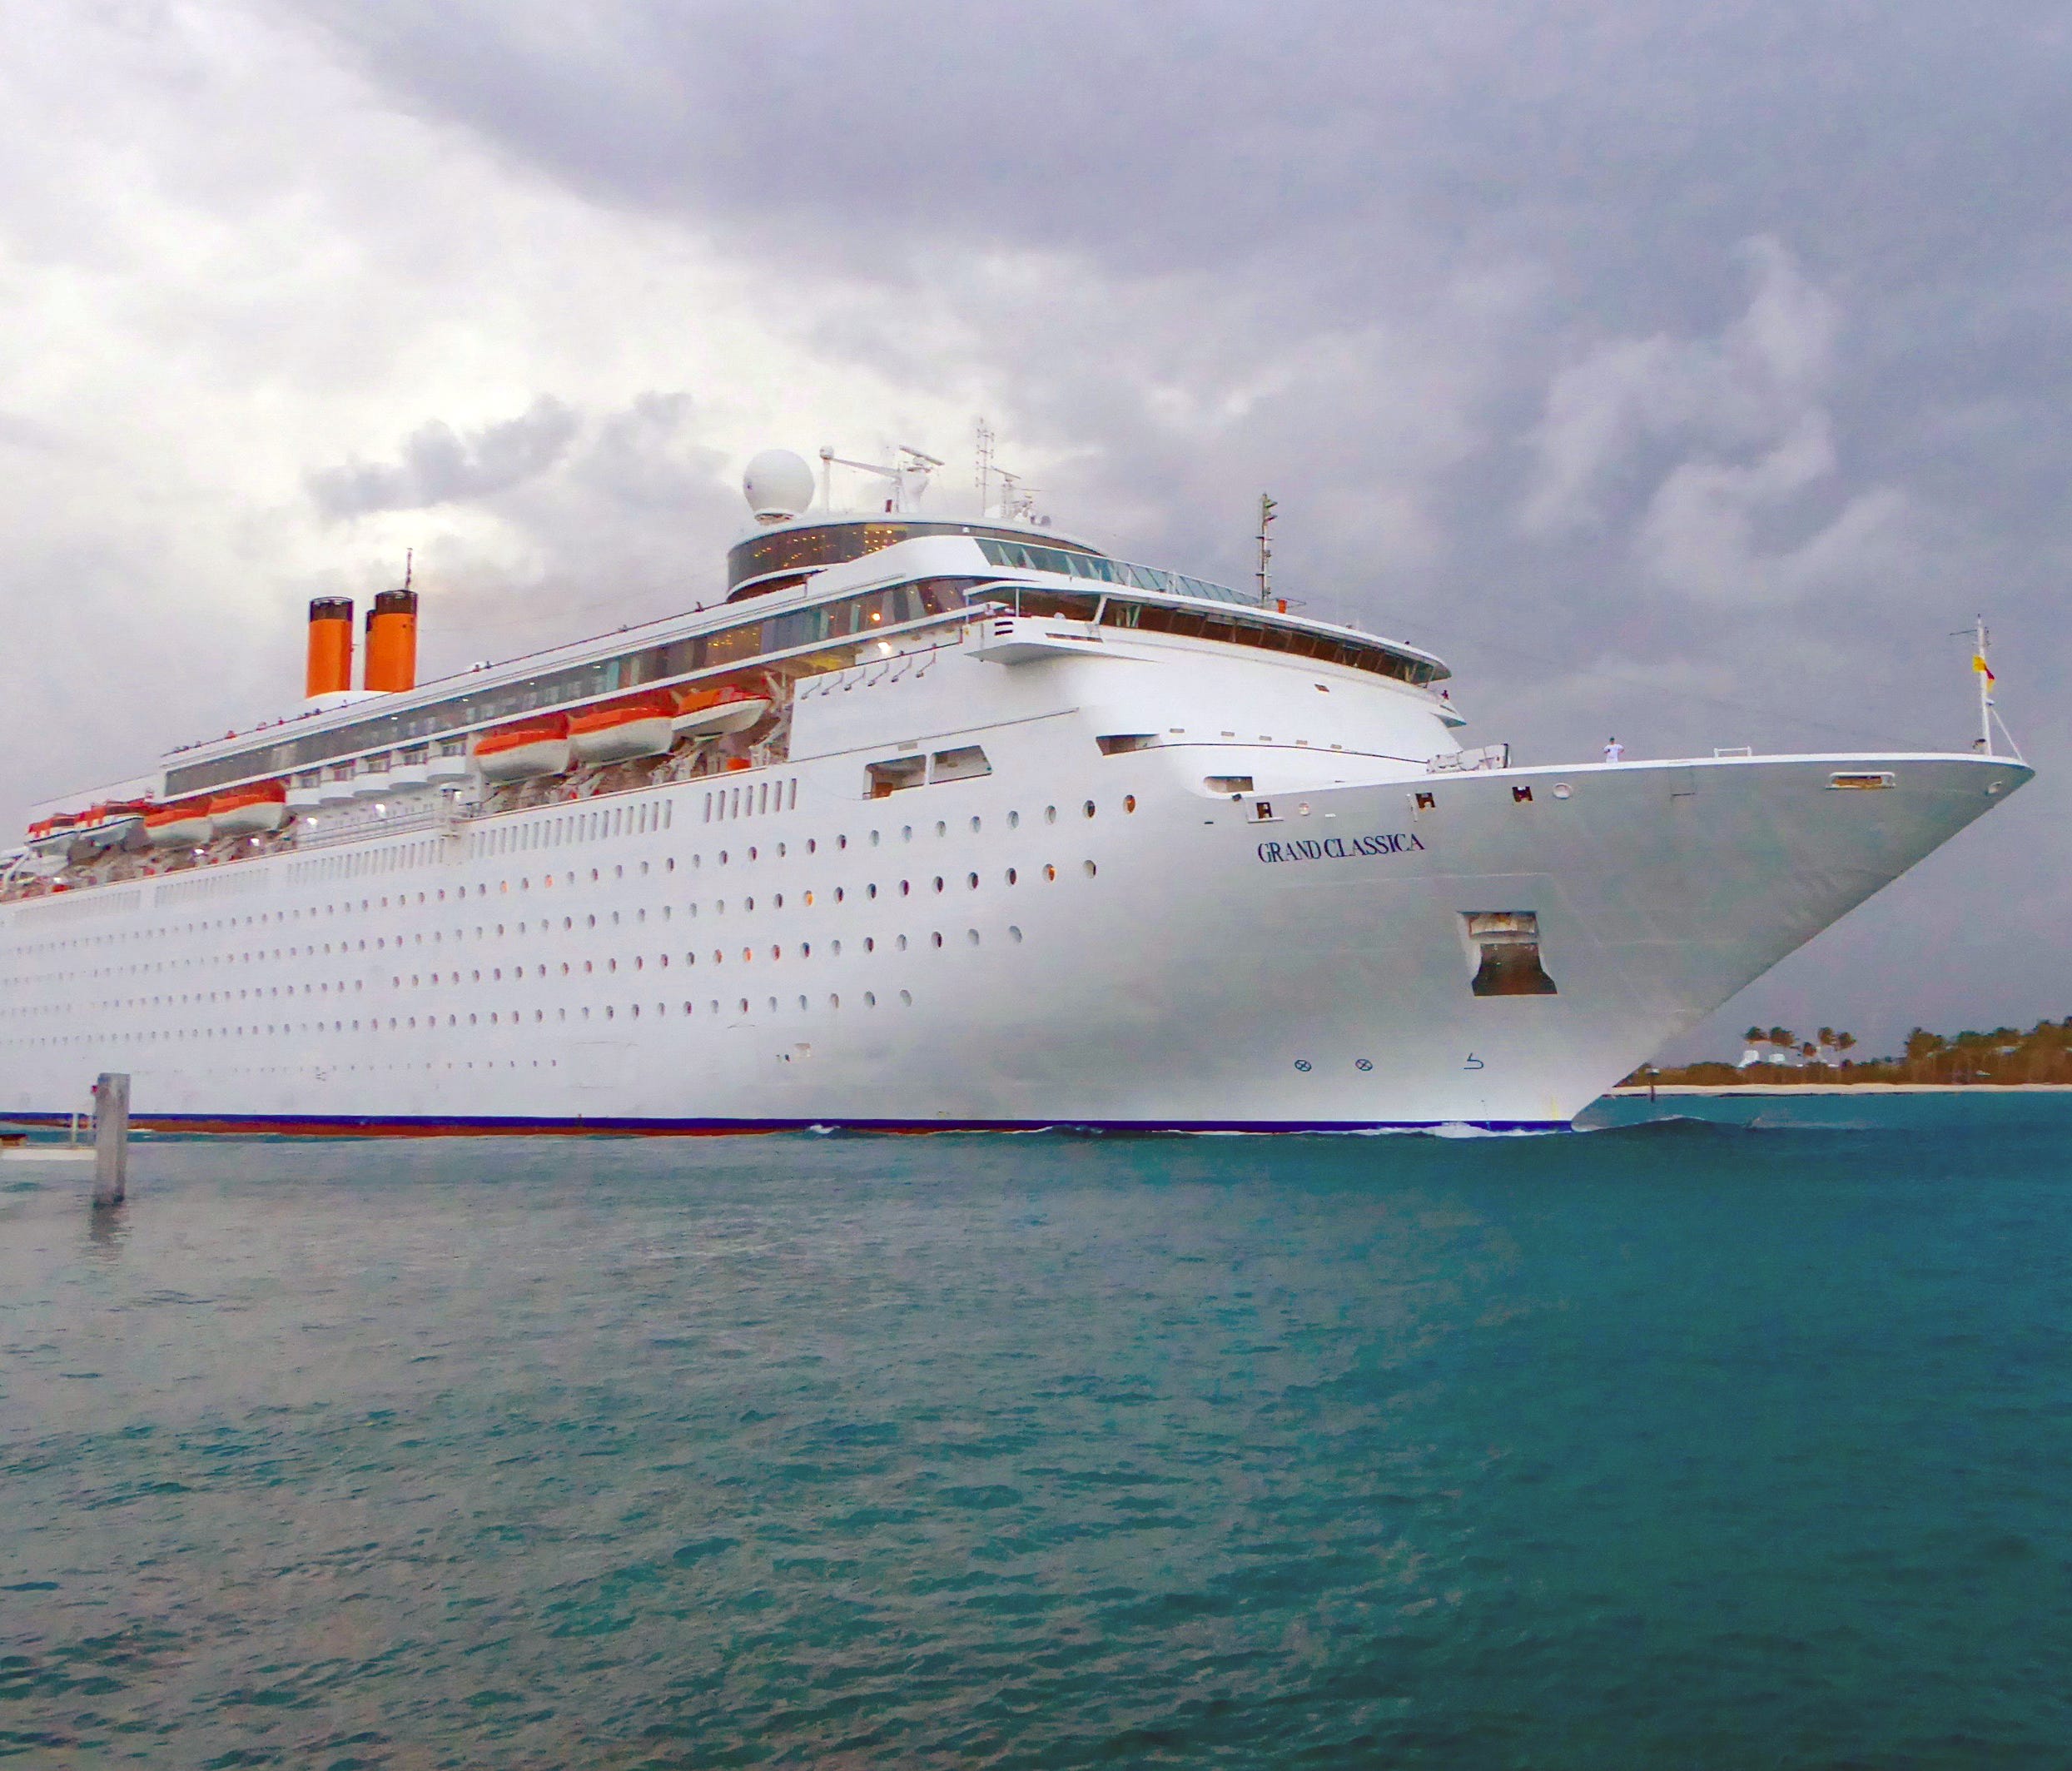 Bahamas Paradise Cruise Line's 1,680-guest Grand Classica is the latest ship to offer two-night cruises from the port of Palm Beach, Fla., to Freeport, Bahamas. It sails in tandem with the slightly smaller Grand Celebration to provide daily departure